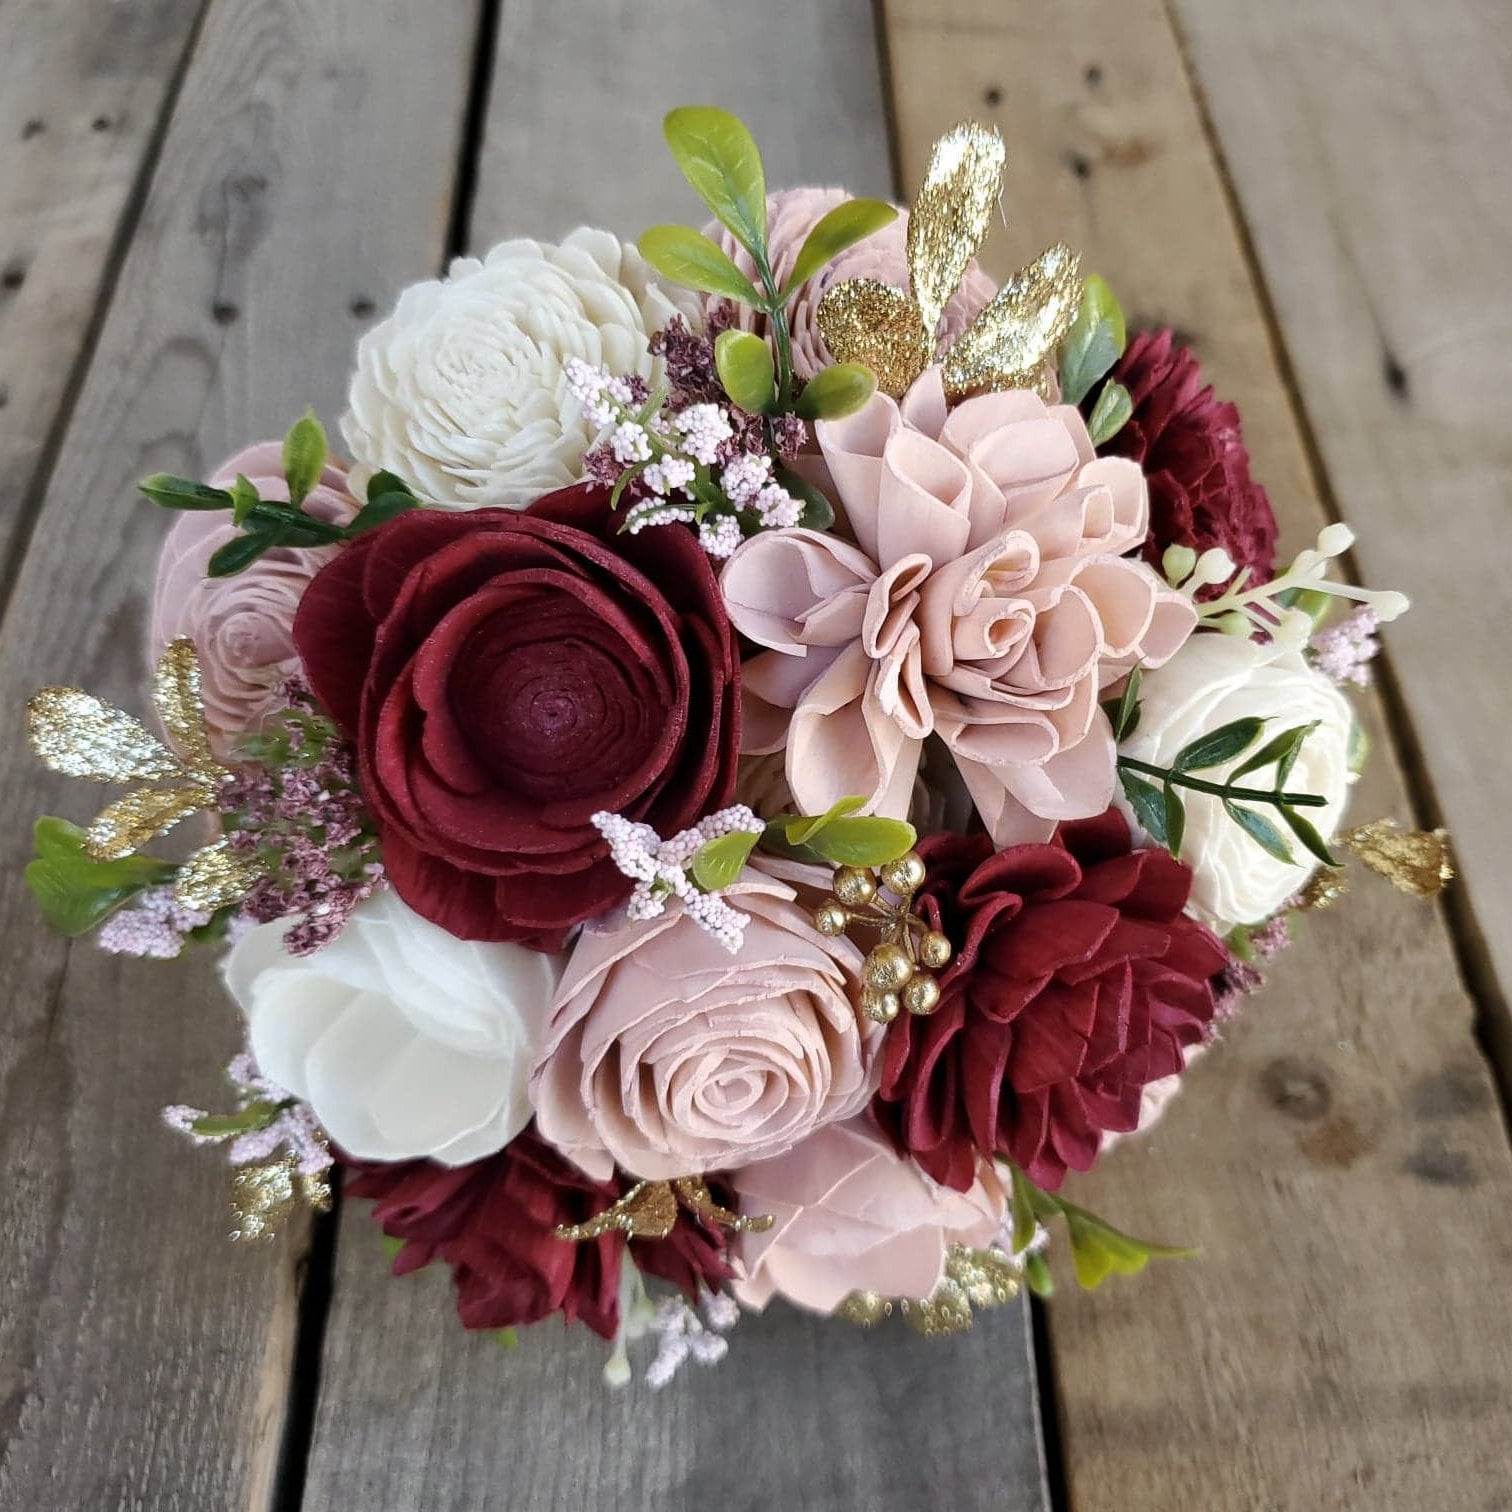 Burgundy, Blush, and Cream Wood Flower Bouquet with Gold Accents and Boxwood, bridal bouquet, bridesmaid bouquet, flower girl